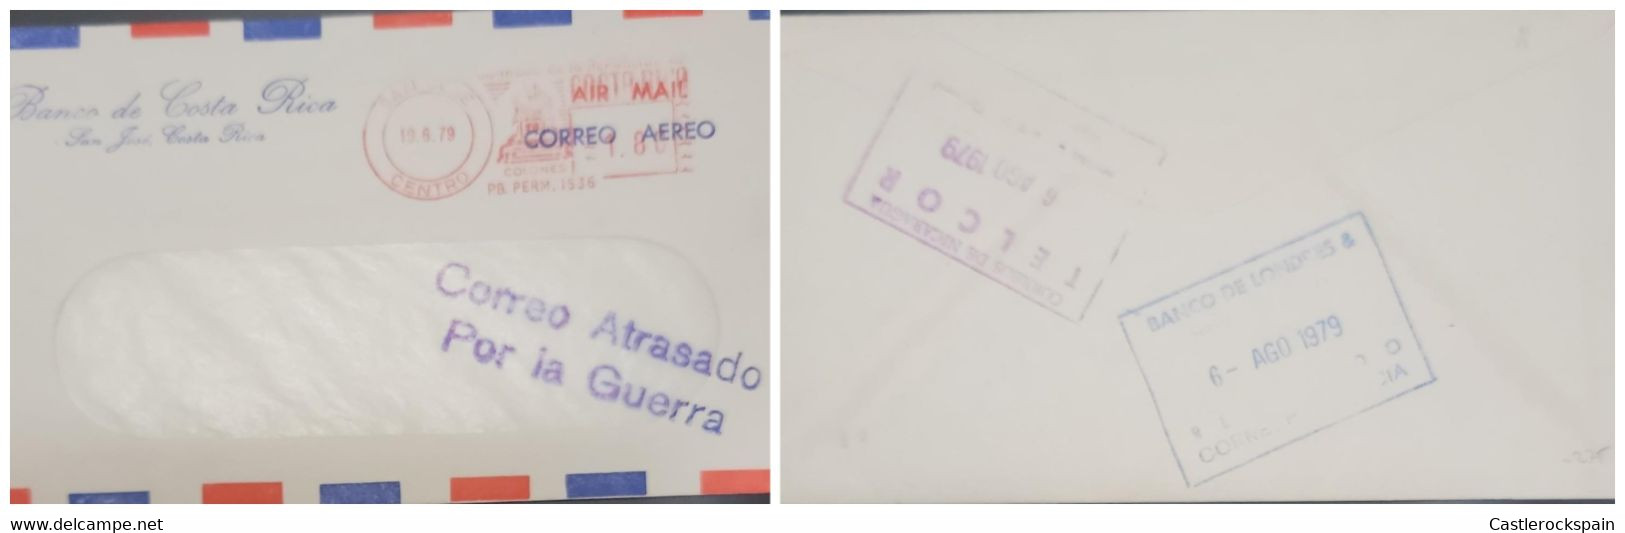 O) 1979 COSTA RICA, BACKGROUND BY THE WAR, METER STAMP, AIRMAIL, COSTA RICA BANK, CIRCULATED COVER TO LONDON BANK, TELCO - Costa Rica